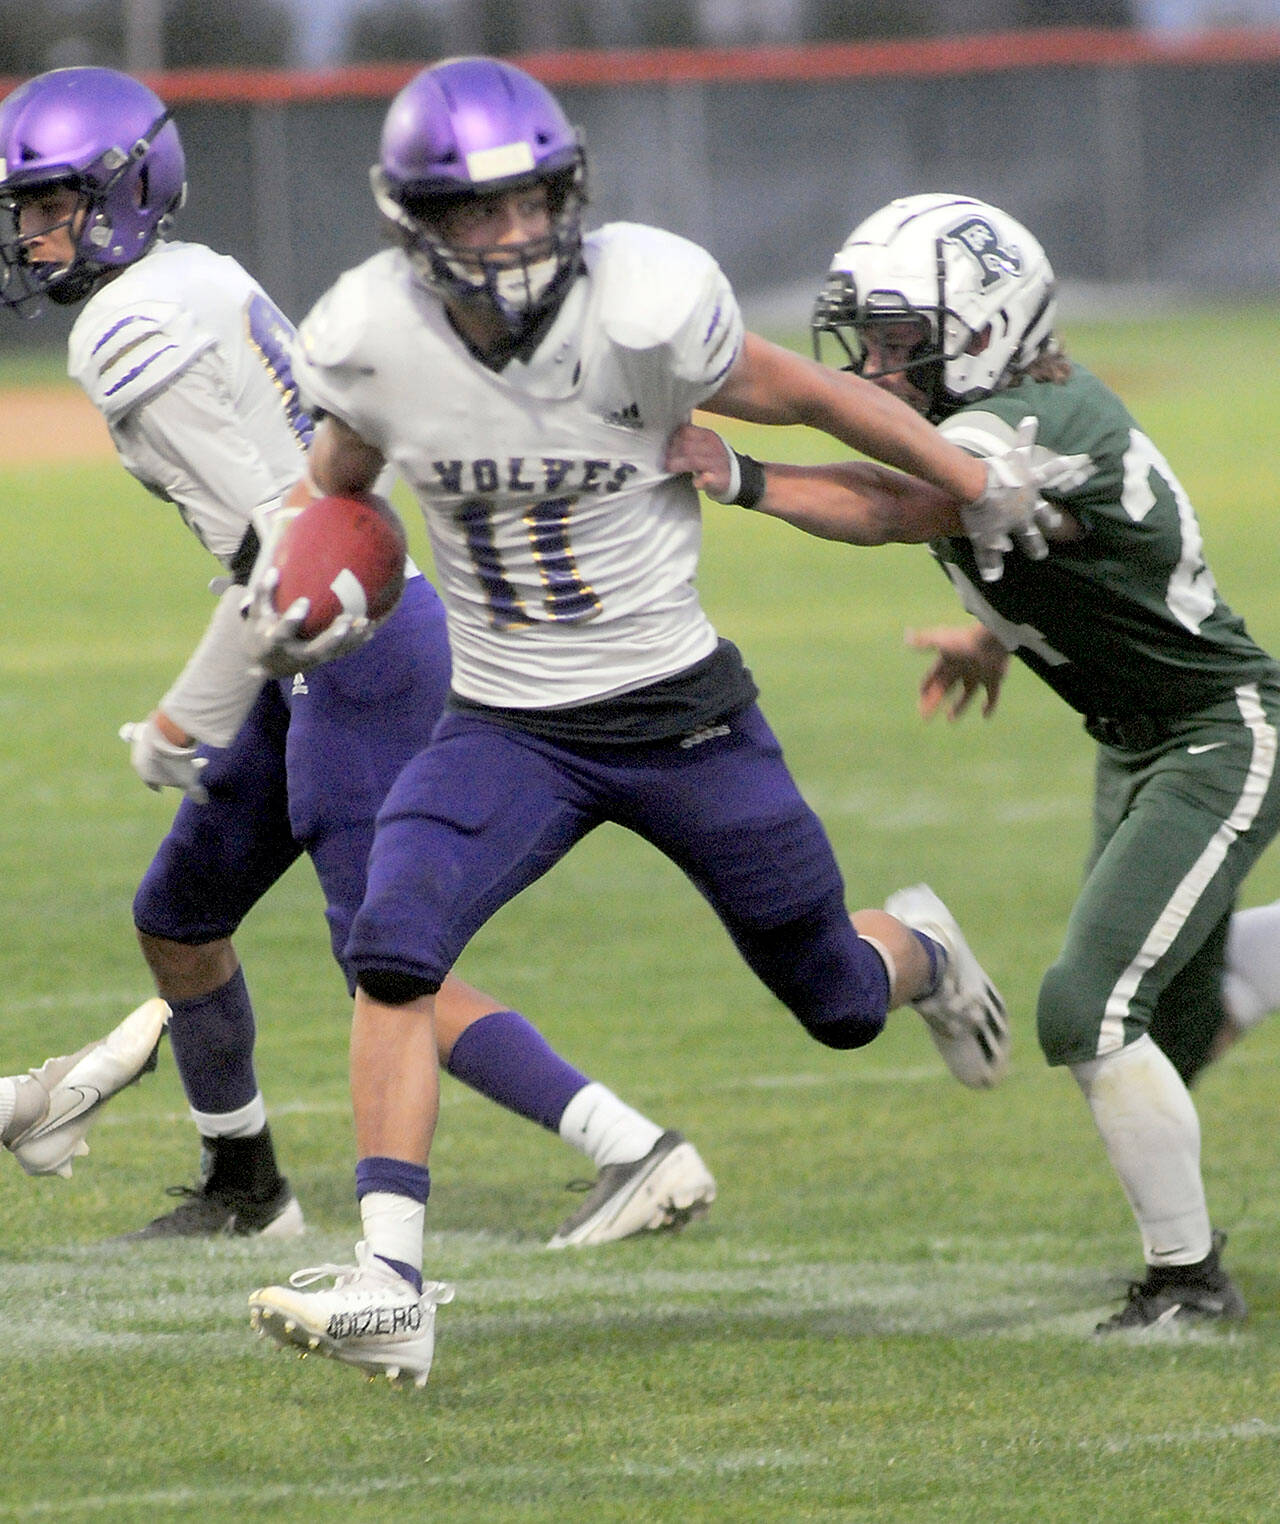 KEITH THORPE/PENINSULA DAILY NEWS
Sequim's Aiden Gockerell, center, fends of the defense of Port Angeles'  James Browning on Friday at Port Angeles Civic Field.